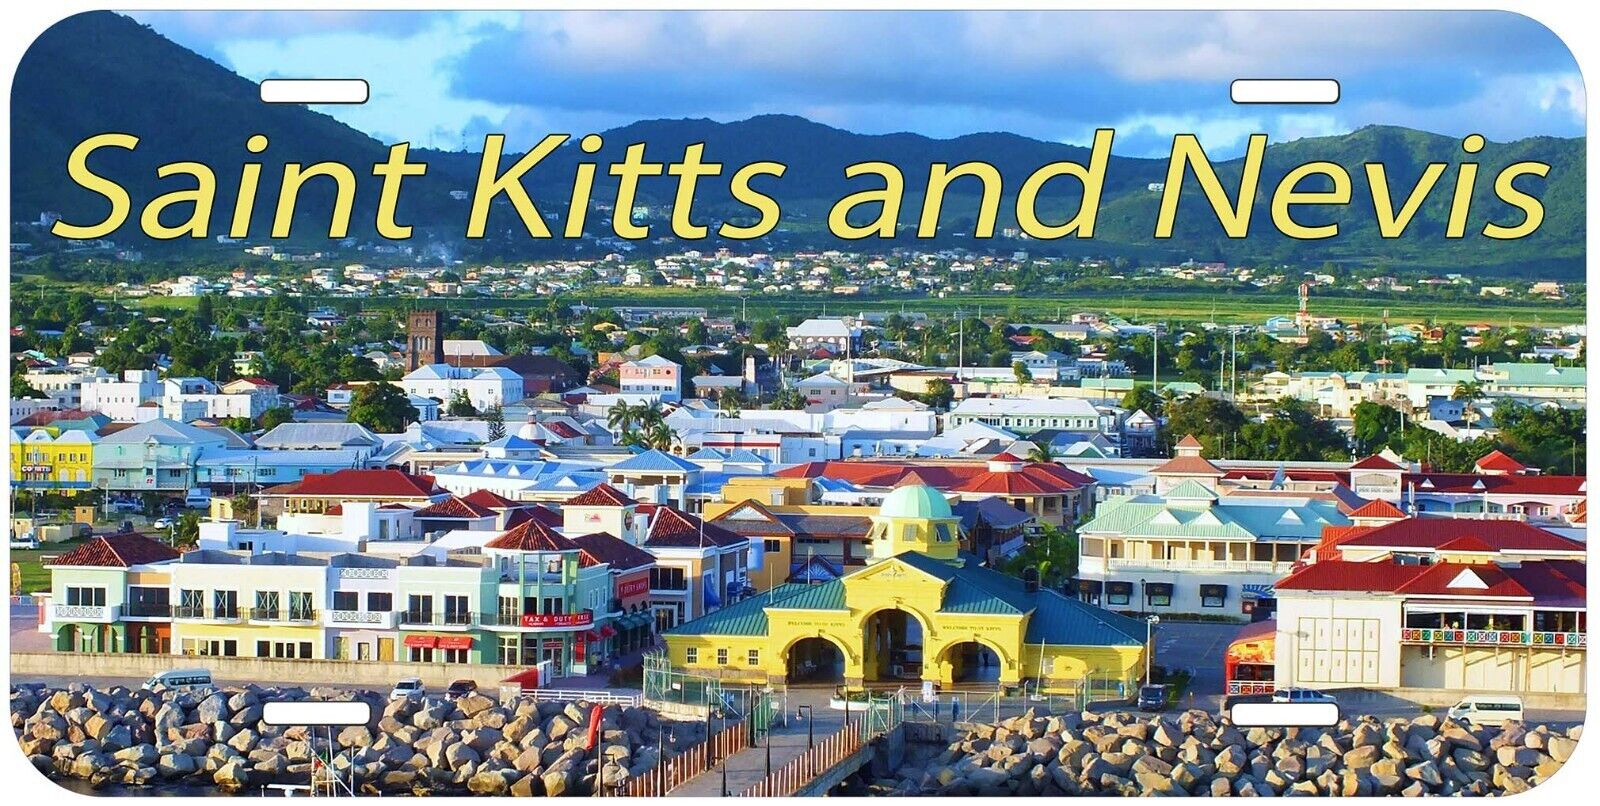 Saint Kitts and Nevis Novelty Car License Plate